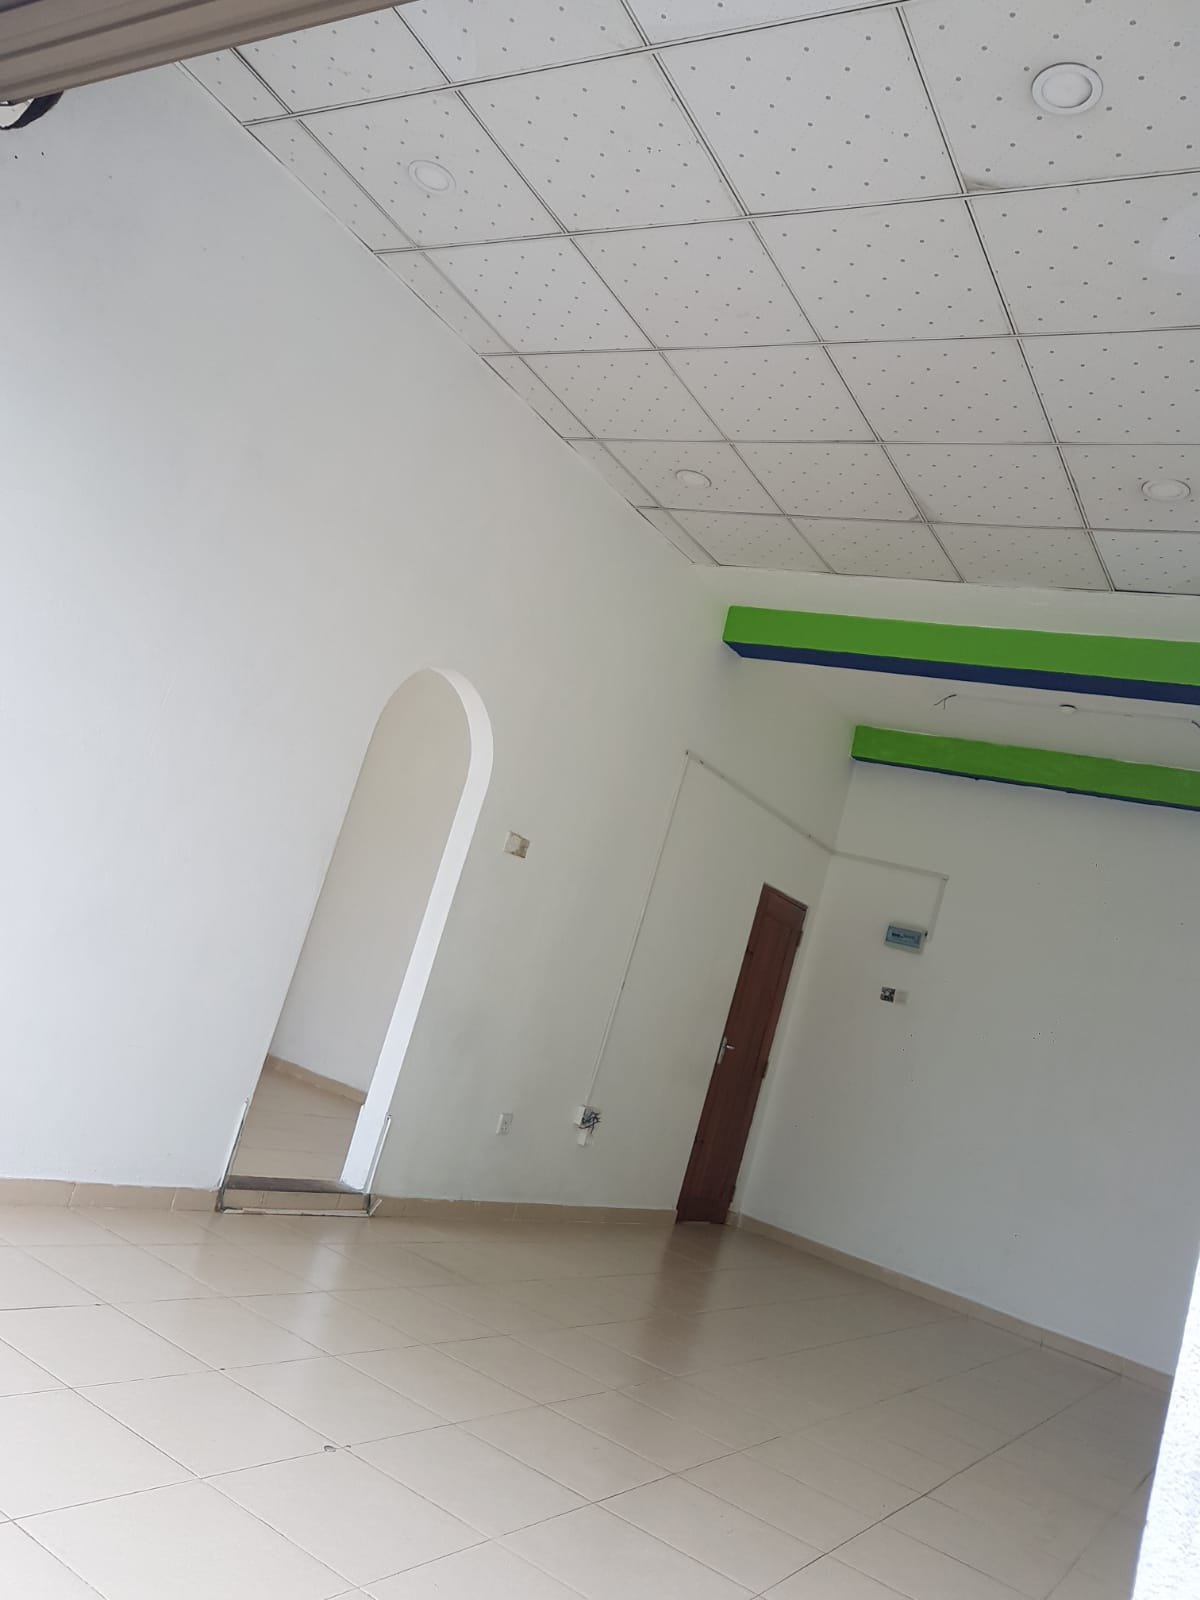 Shop For Rent In Moratuwa